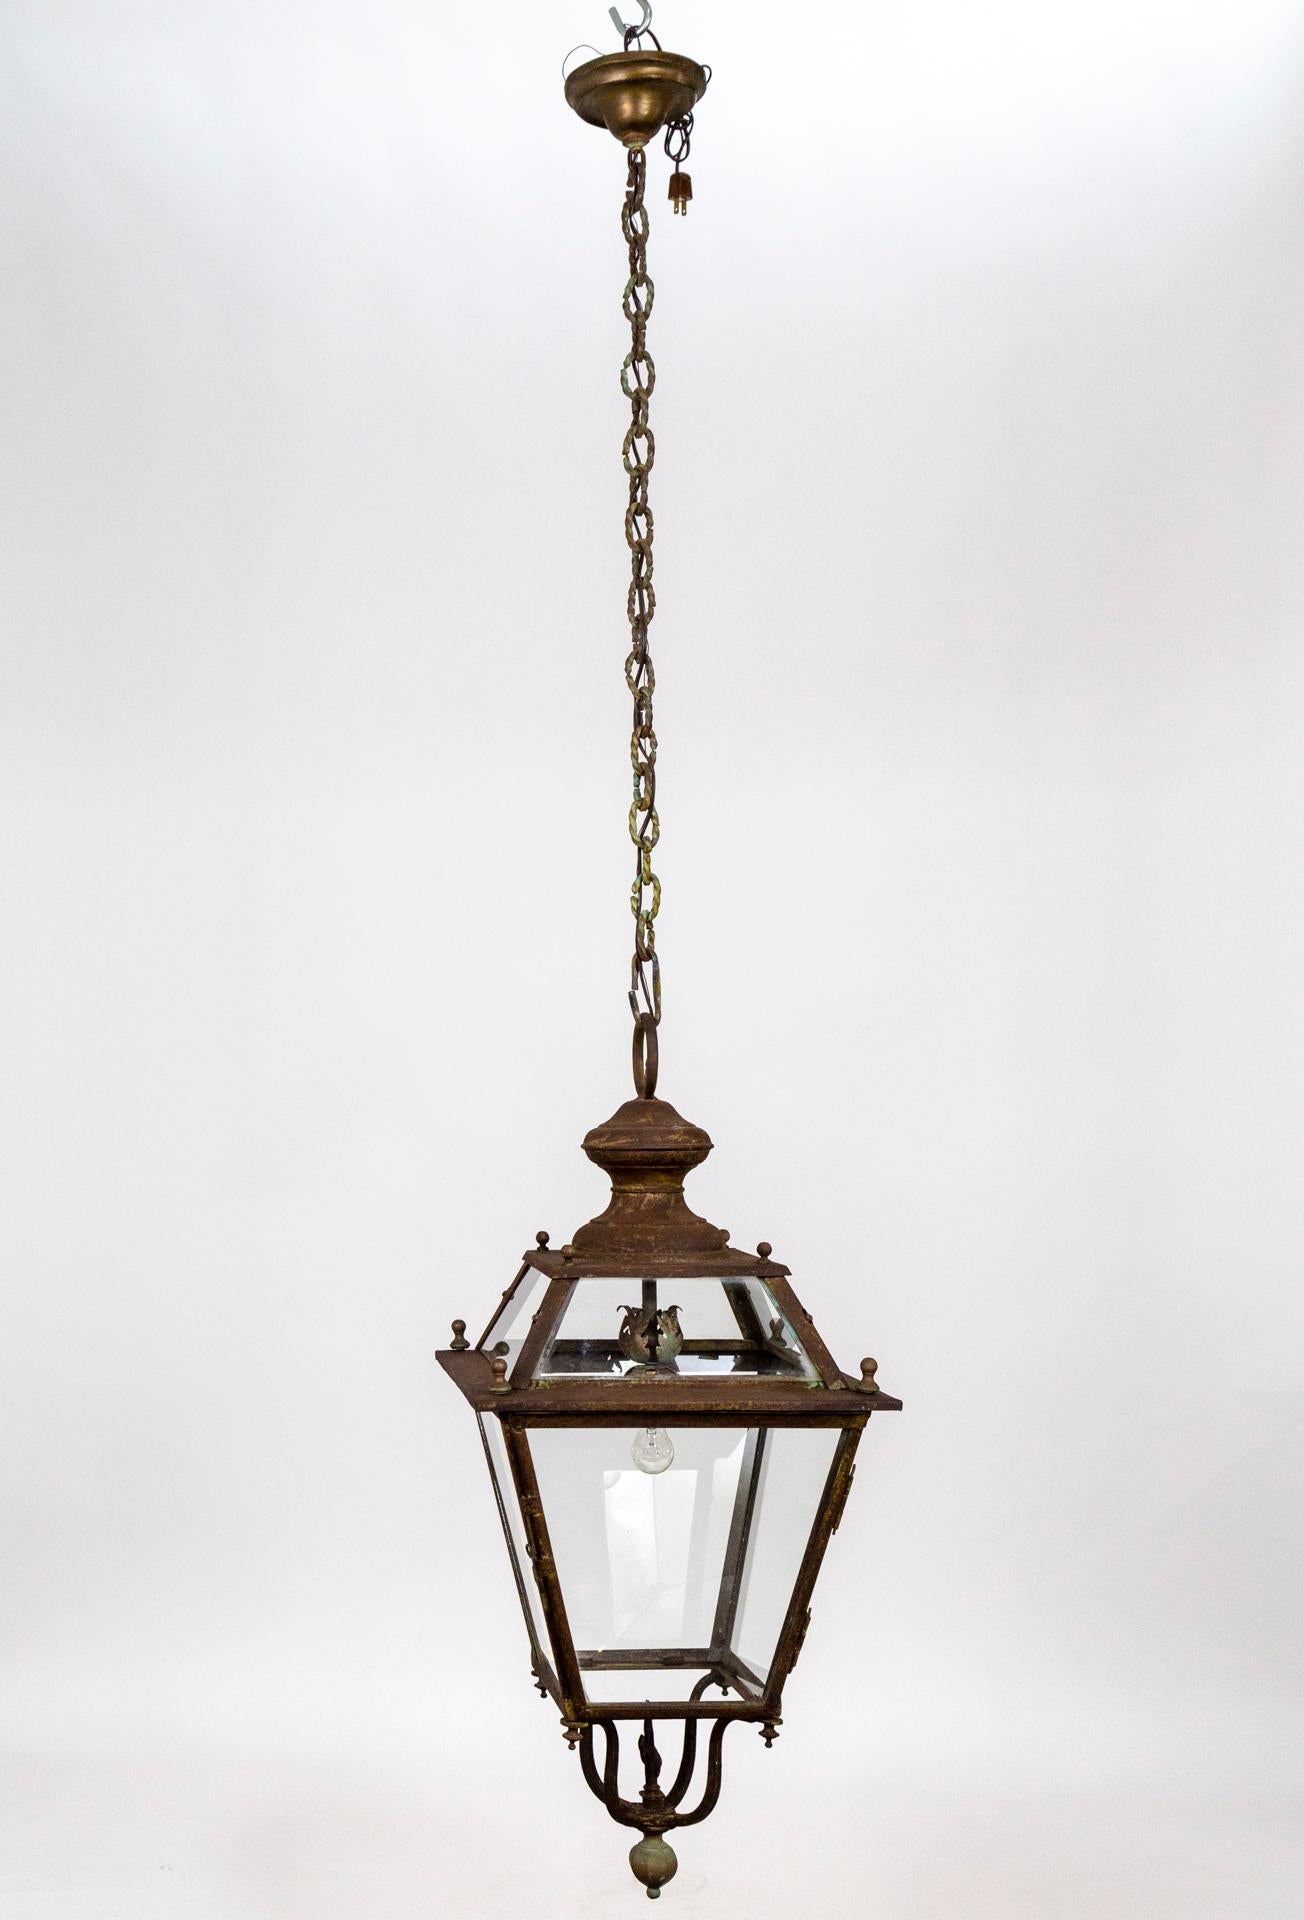 A large, tapered, 4-sided, antique hanging lantern with a beautiful patina texture in bronze and rust. It has a twisted-link chain with some verdigris in the variegated patina and leaf details on the socket cover and a large fleur de lis on top of